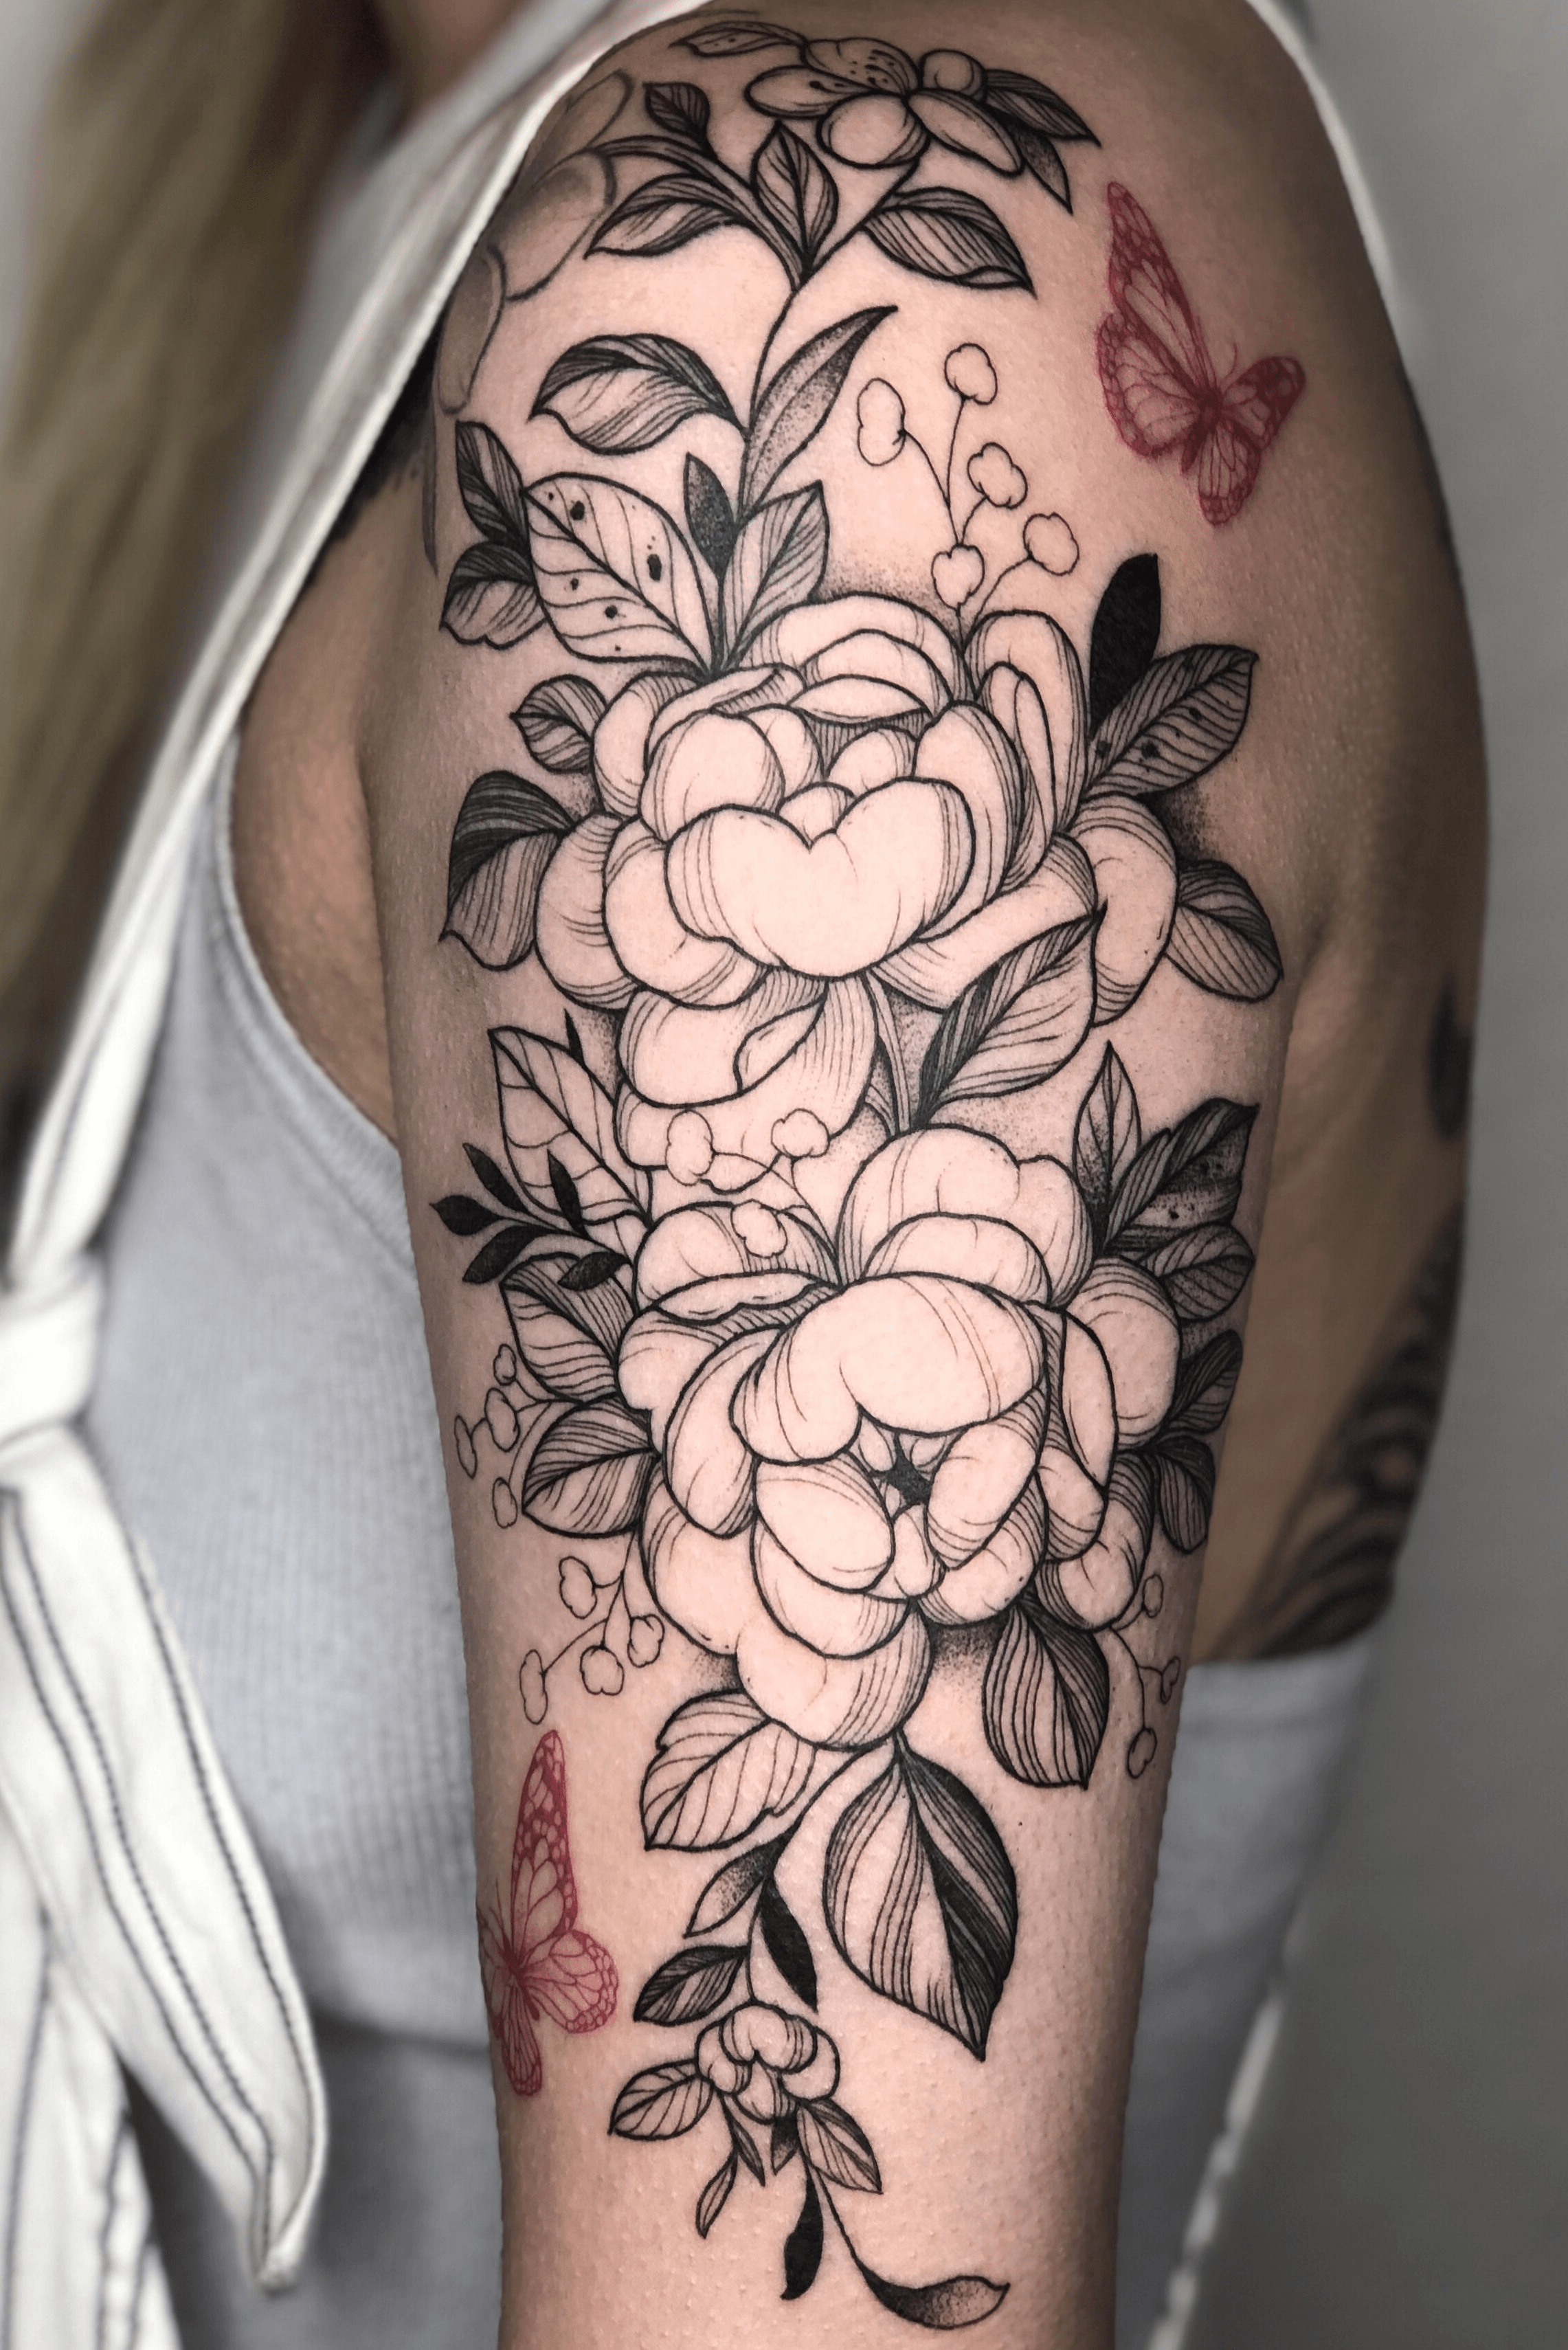 Wylde Sydes Tattoos Instagram post Black and gray roses with butterflies  sleeve tattoo By Jesus wwww  Forearm tattoo women Tattoos Butterfly  sleeve tattoo